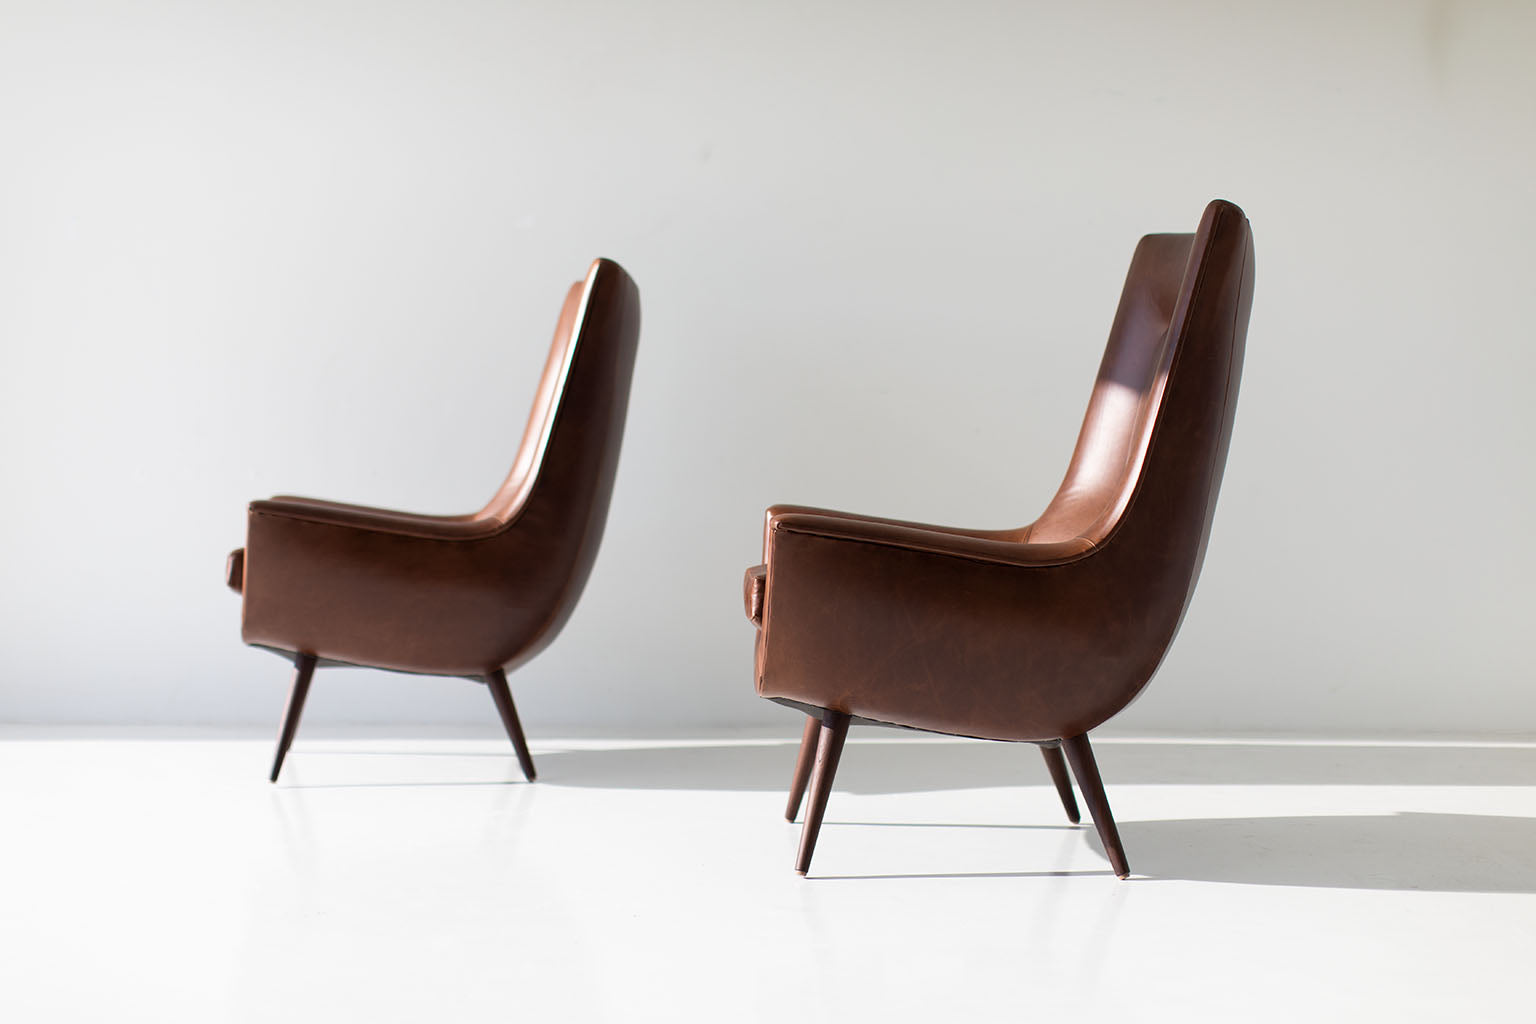 Modern Chairs Peabody | craft Back Lawrence High associates® Craft Chair Associates – furniture 